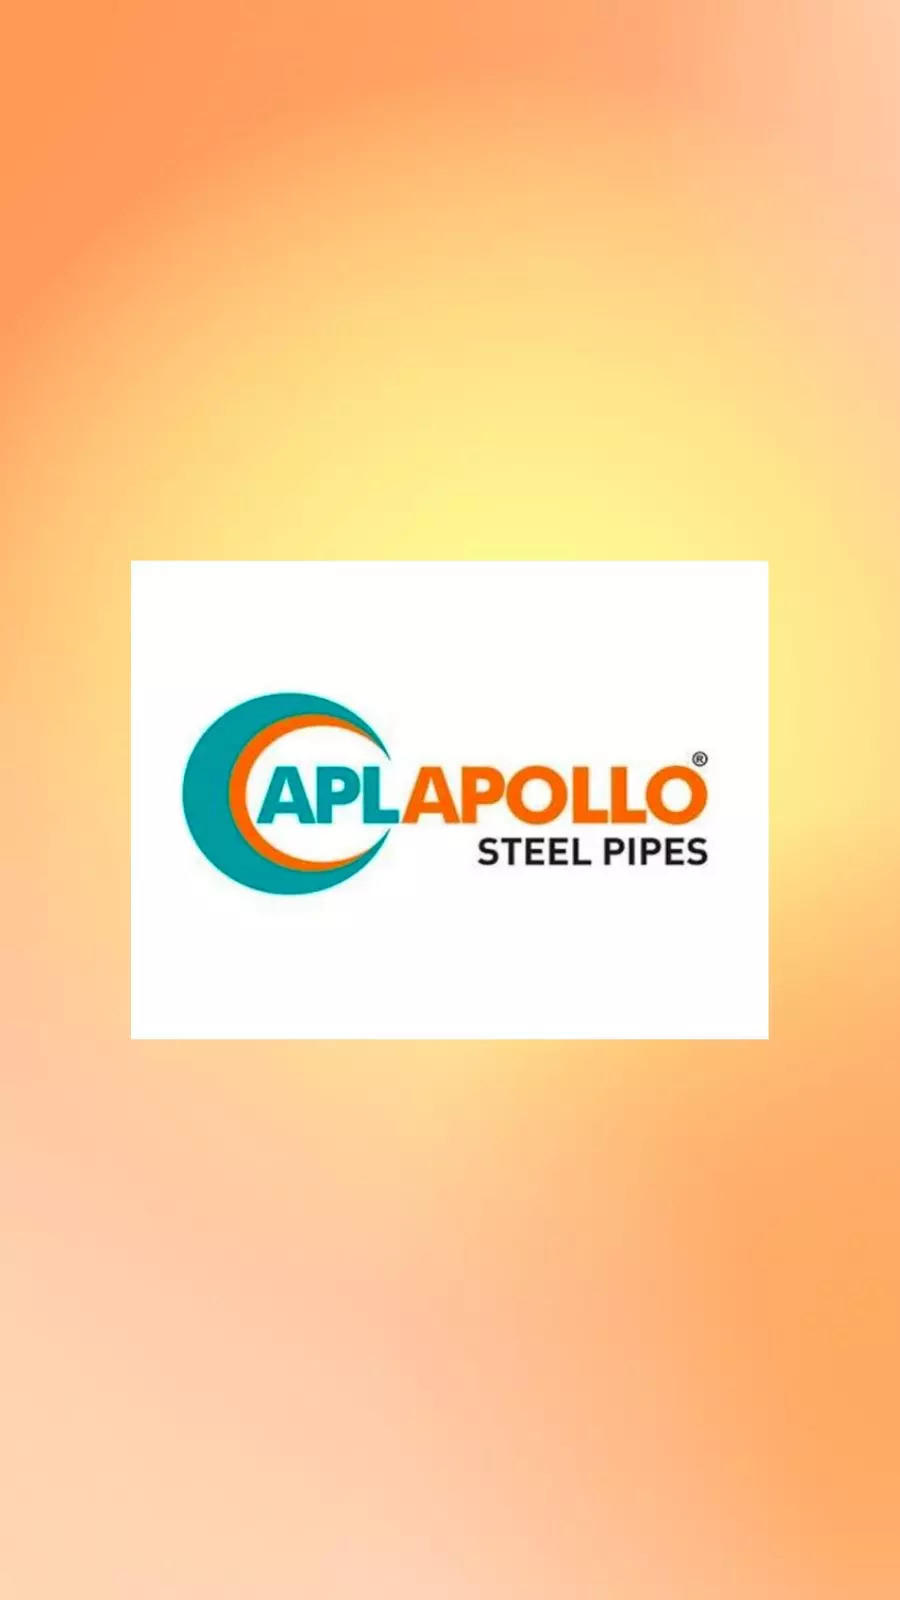 Apollo Pipes Limited - For every need, there's APL Apollo. And for every  purpose, there's a promise of unbeatable strength. APL Apollo Pipes  #NeverCracksUnderPressure, no matter what you're using them for. #APLAPOLLO  #